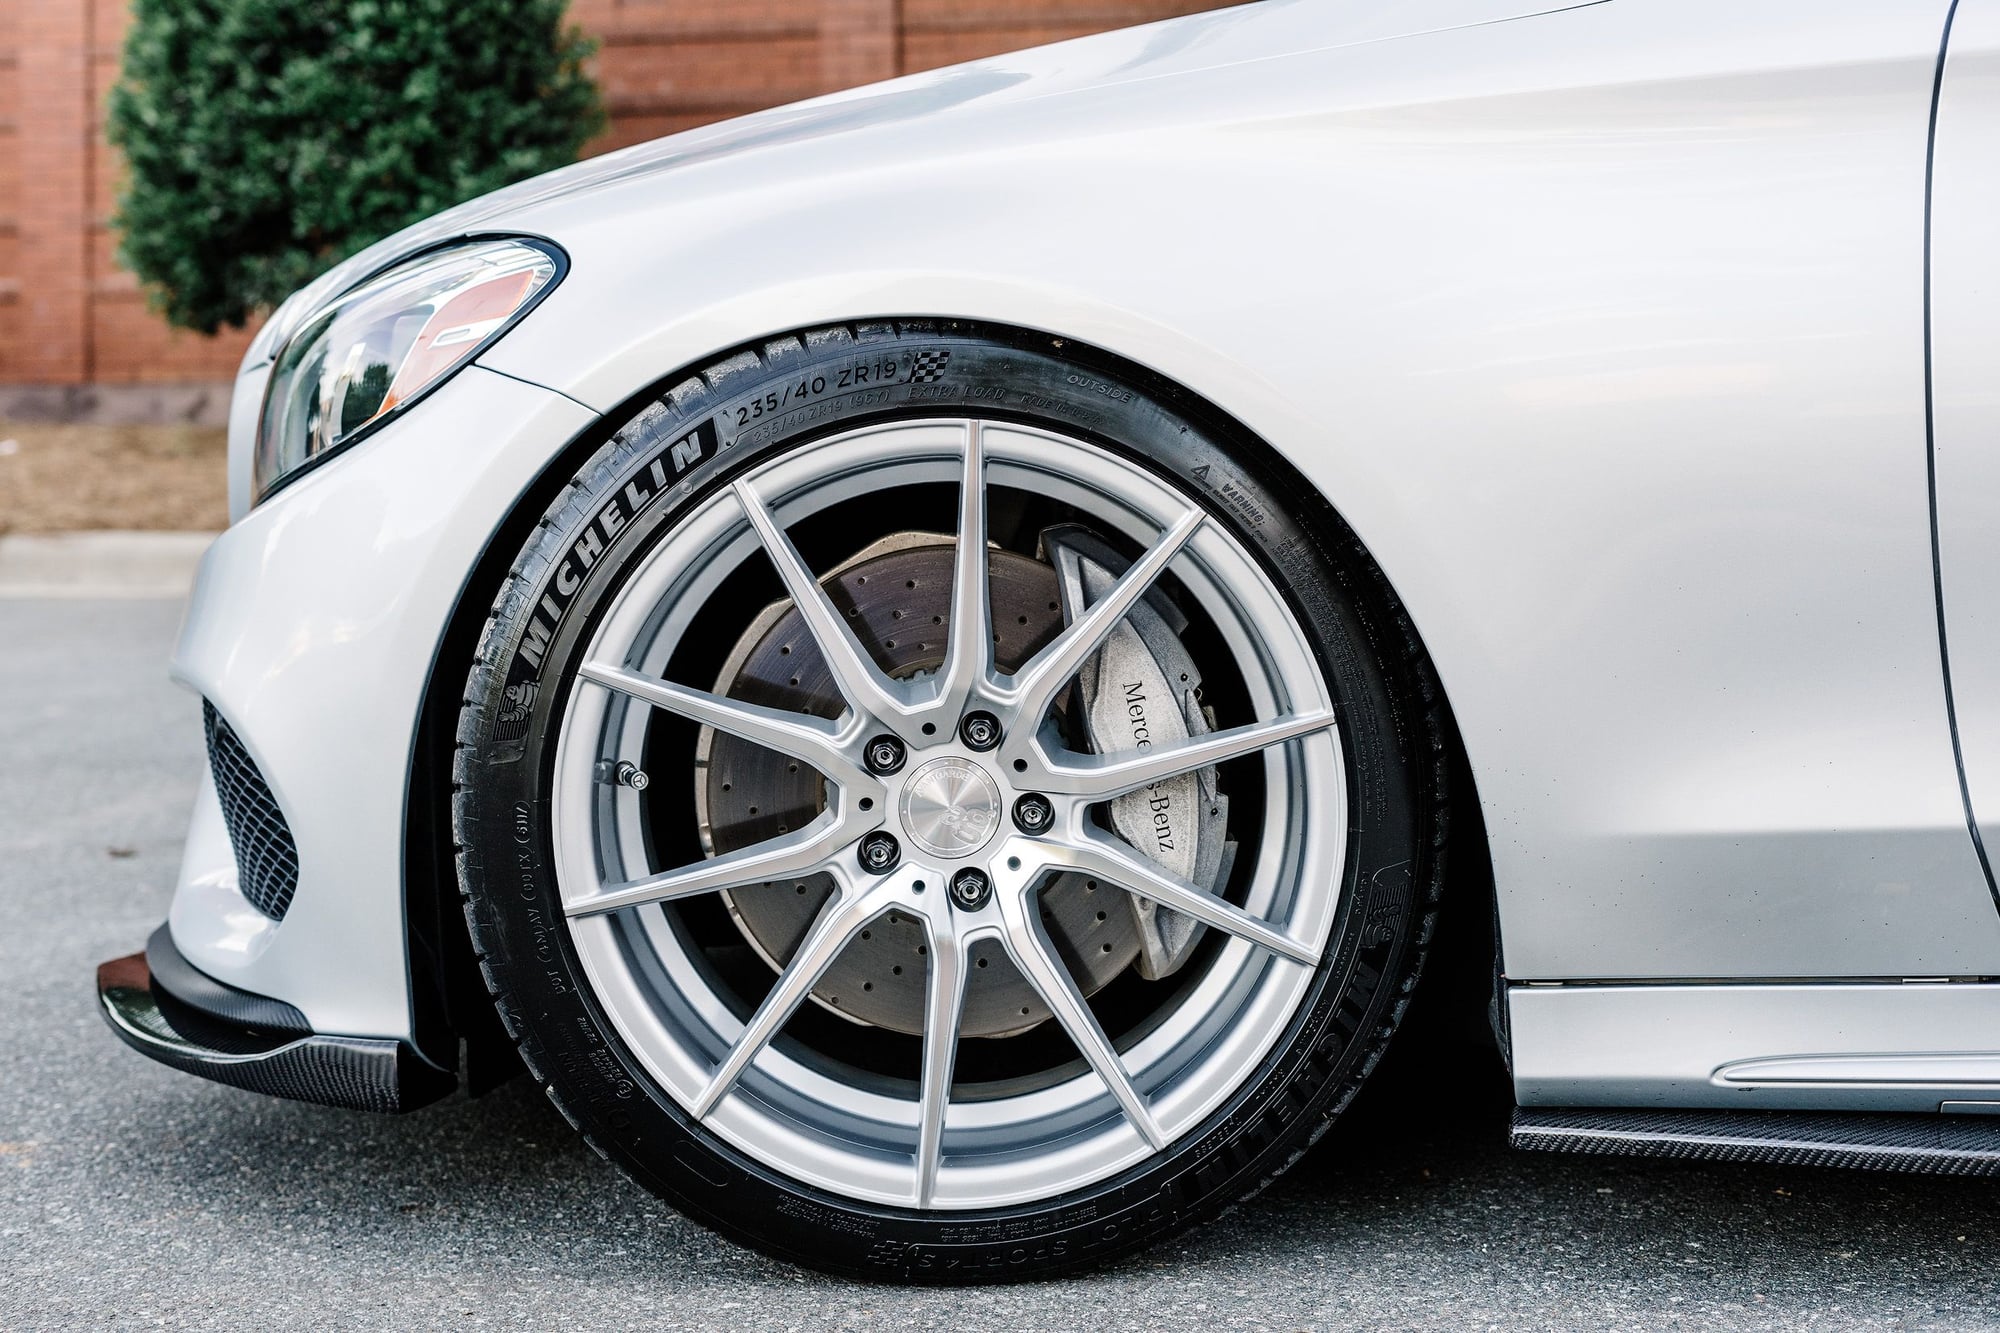 Wheels and Tires/Axles - 19" Staggered Flow Forged Avant Garde M652 ART Series Wheels ***Mint*** Wheel Swap? - Used - All Years Mercedes-Benz C300 - Charlotte, NC 28203, United States